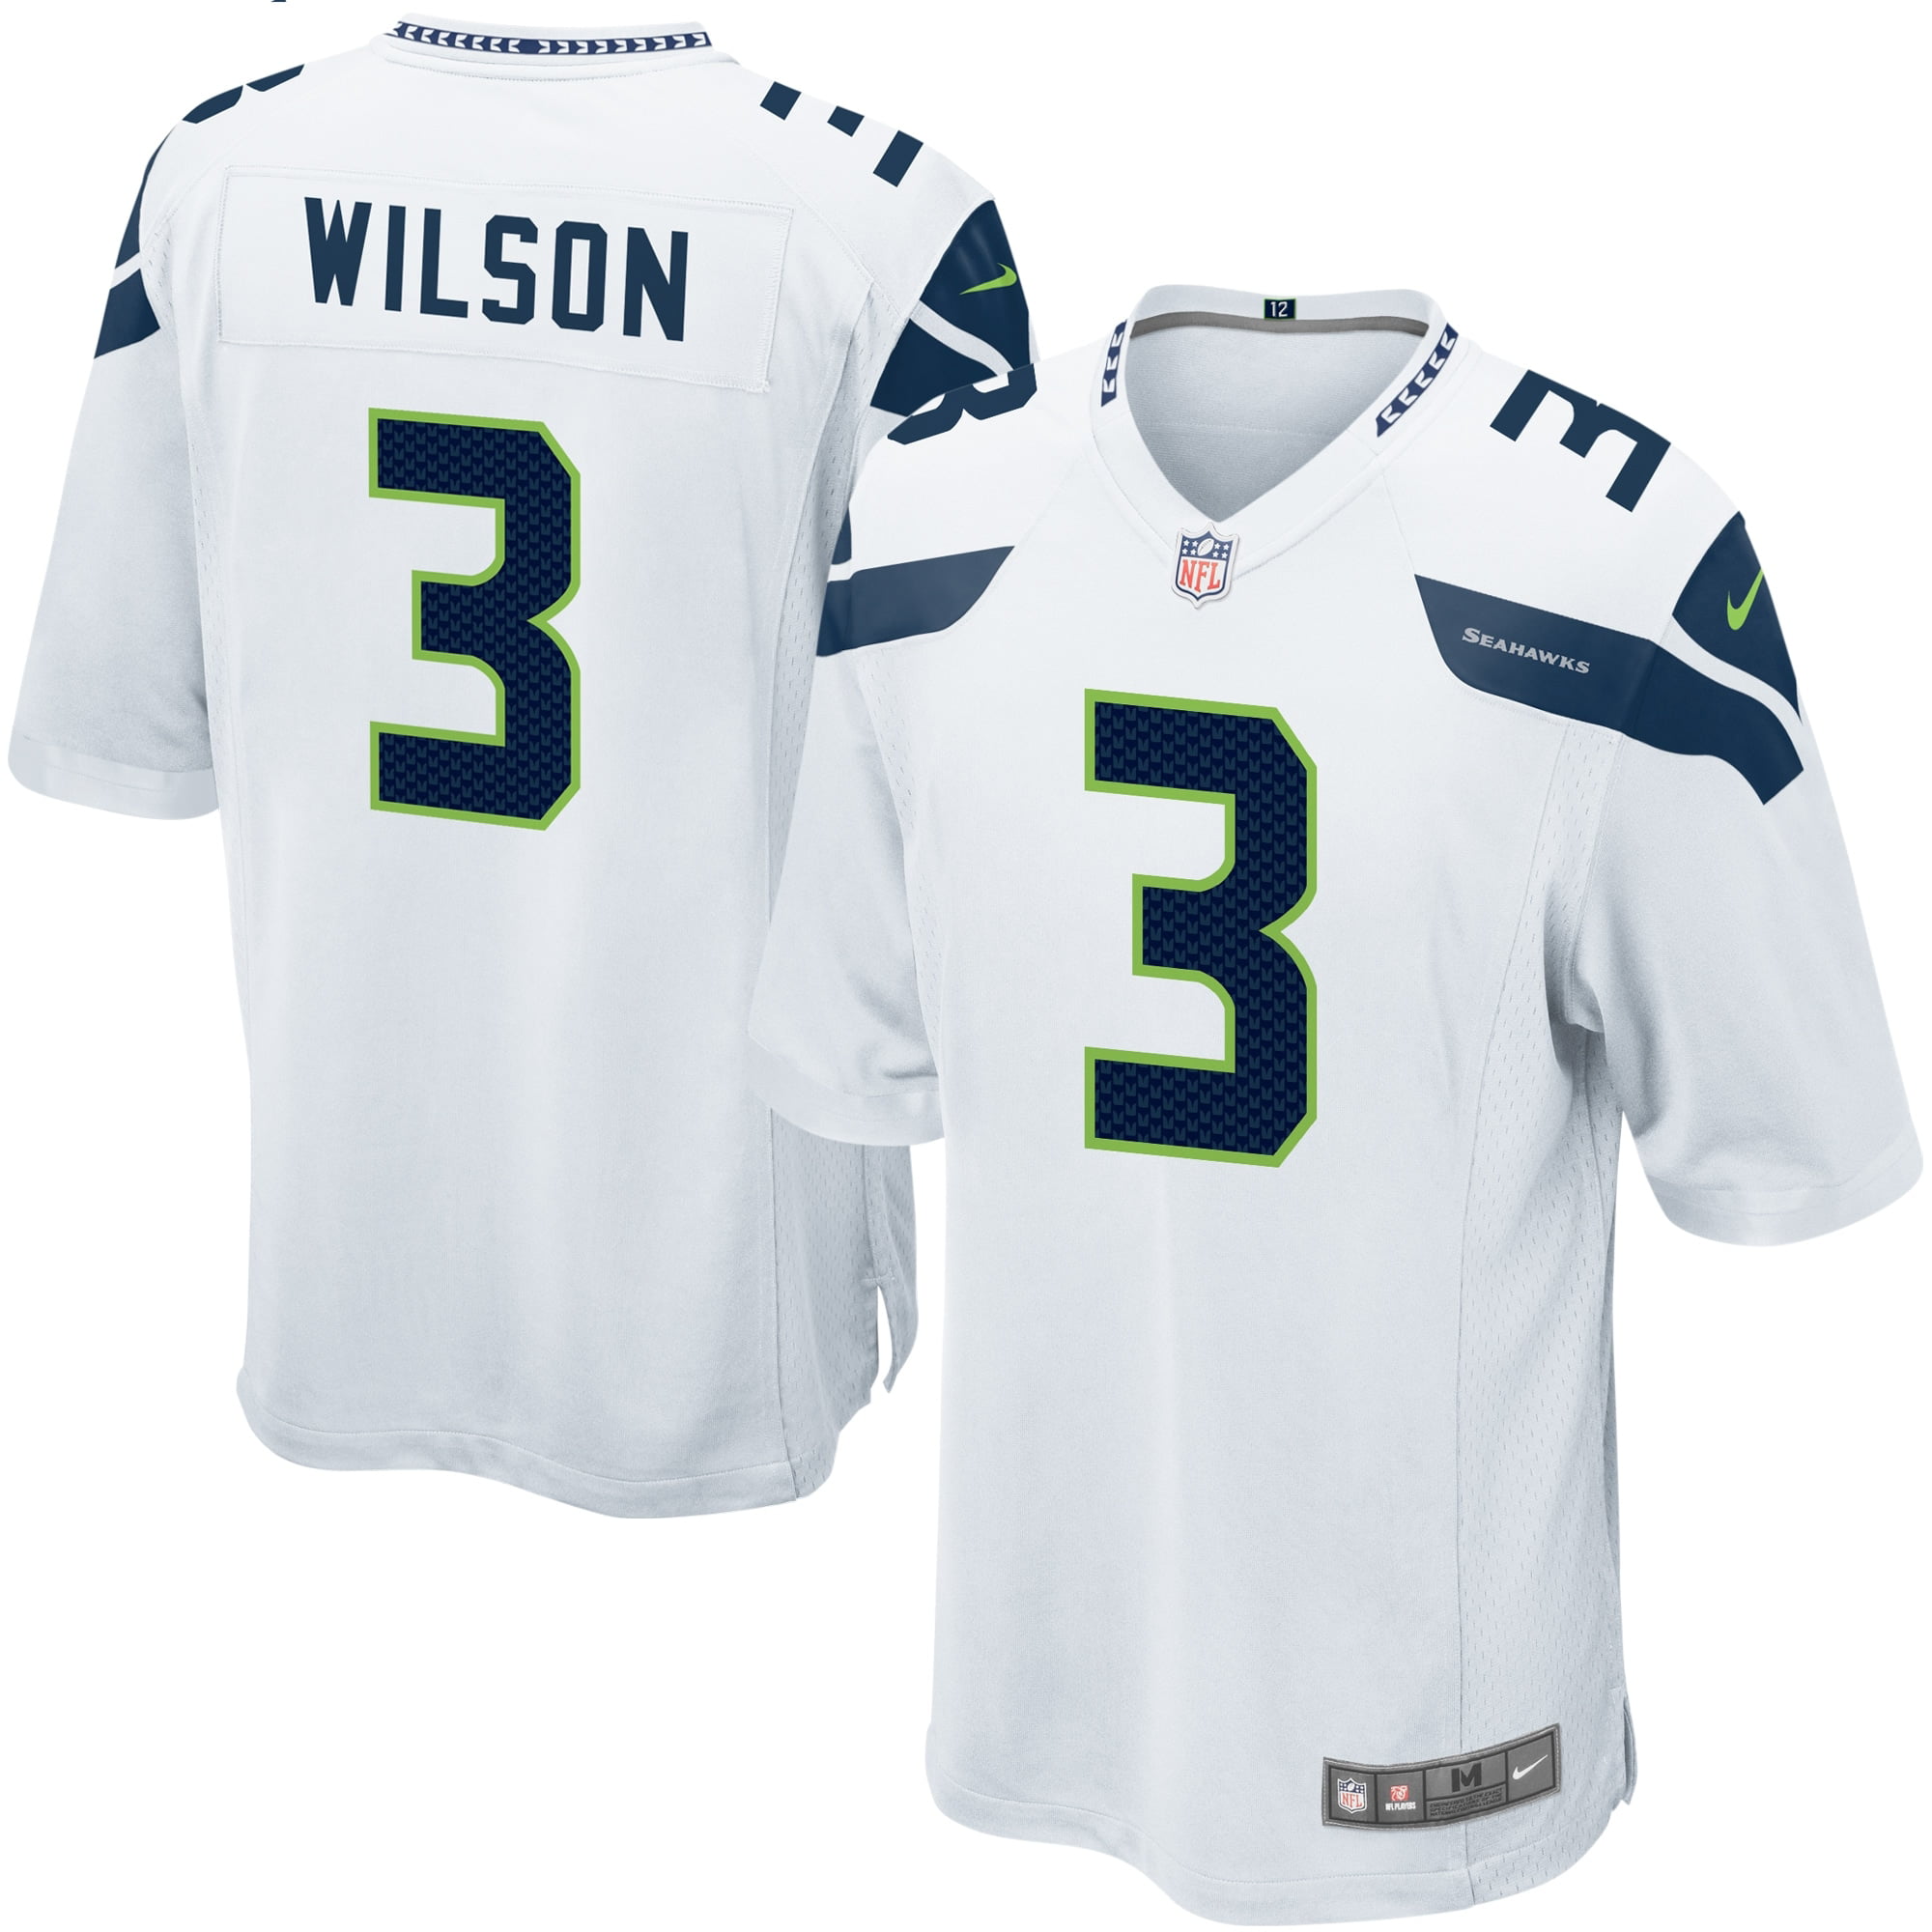 places to buy seahawks jerseys